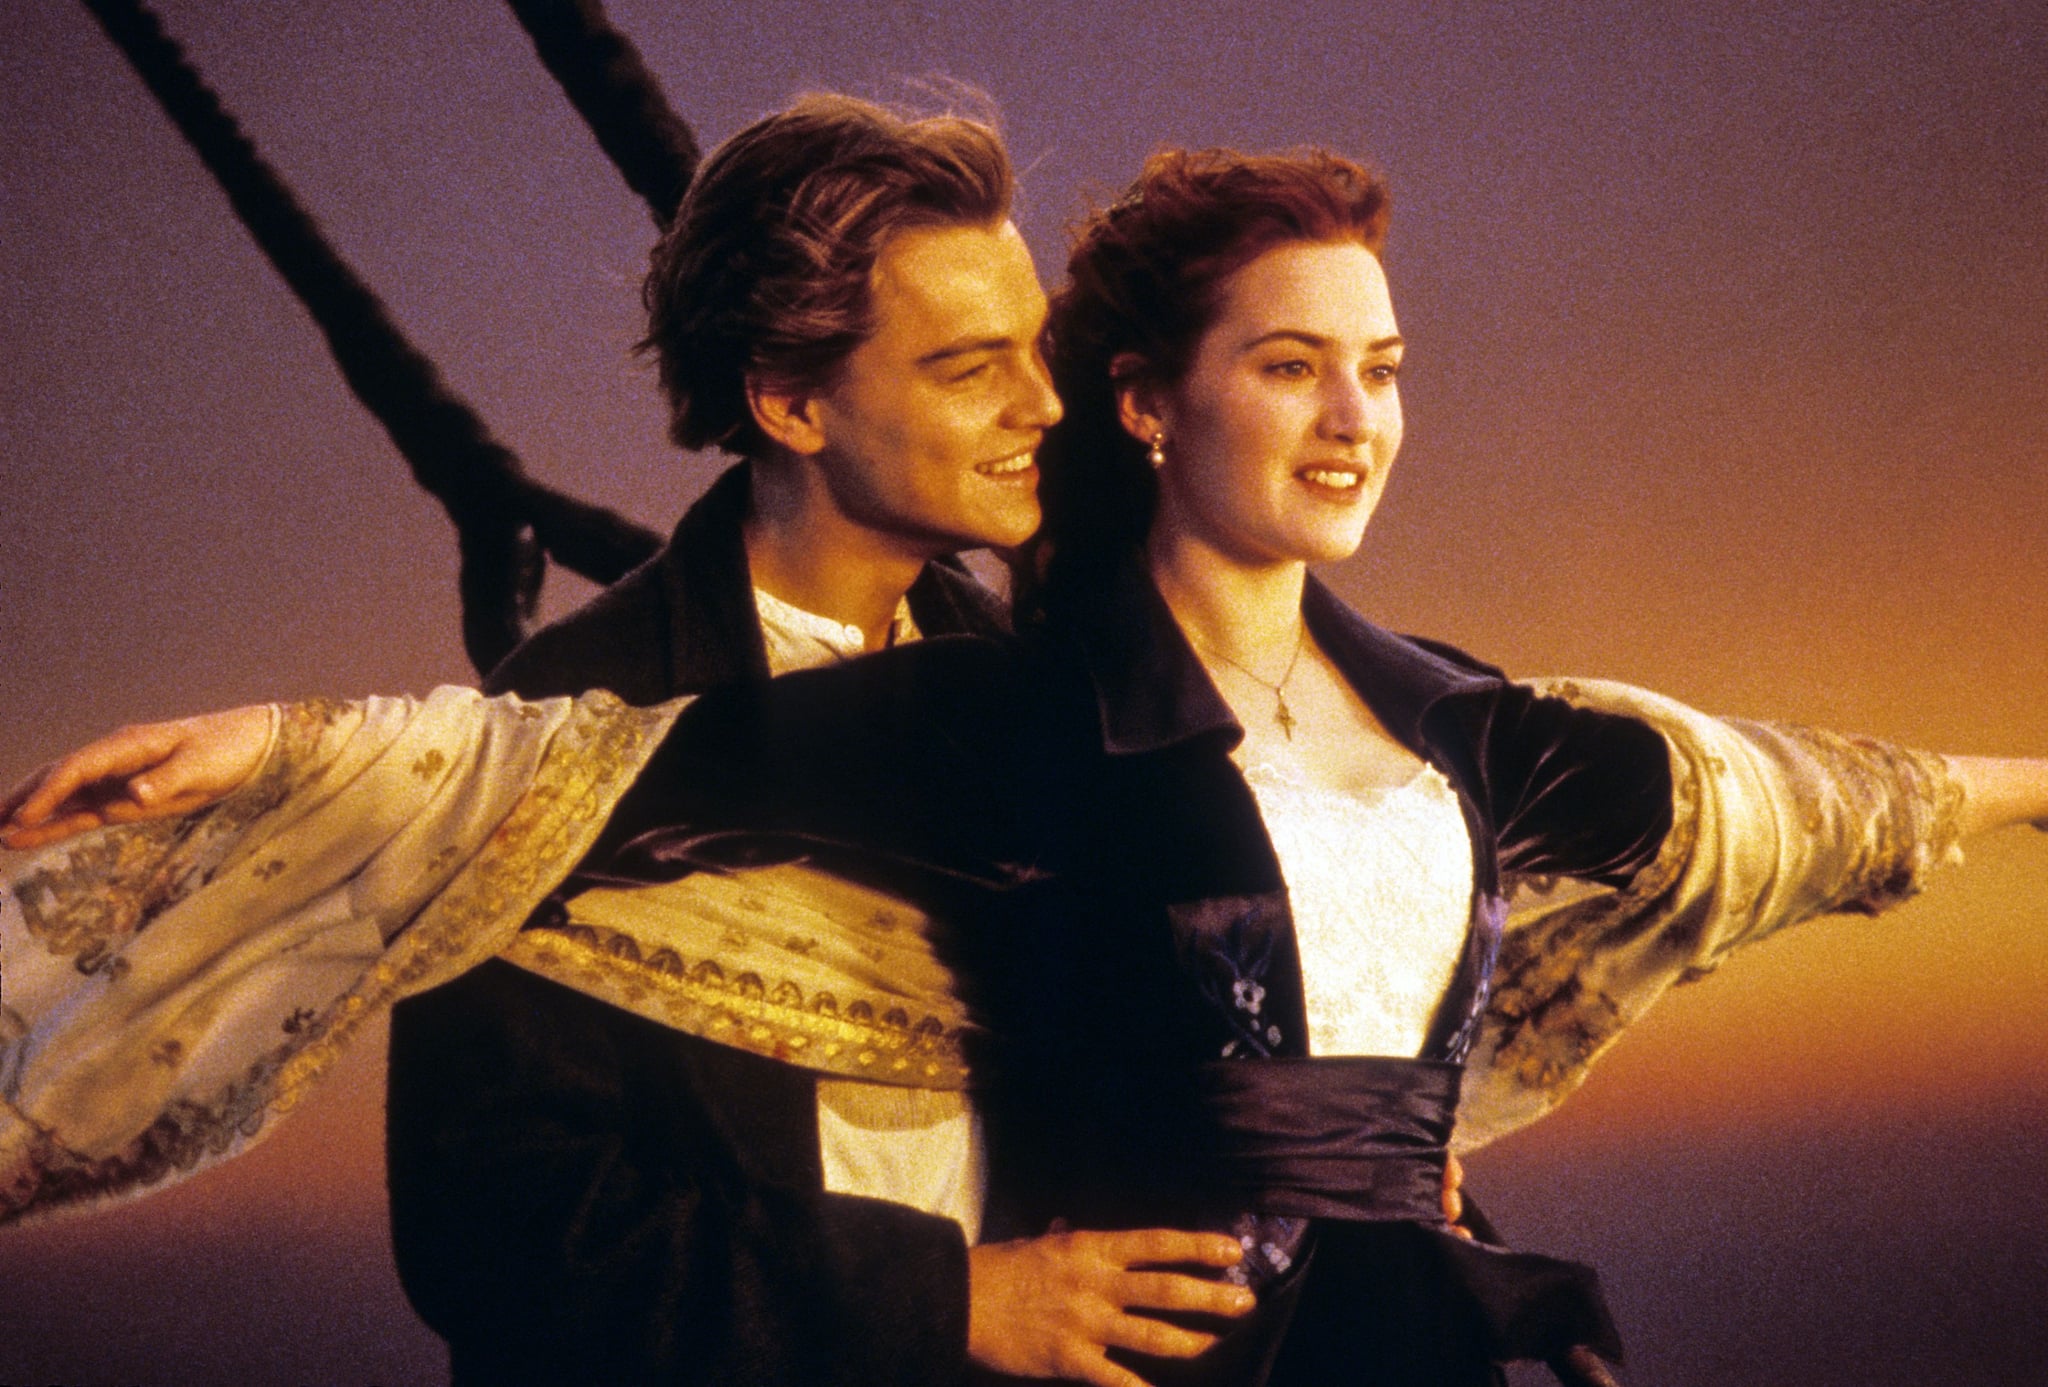 TITANIC, from left: Leonardo DiCaprio, Kate Winslet, 1997. ph: Merie W. Wallace / TM and Copyright  20th Century Fox Film Corp. All rights reserved. Courtesy: Everett Collection.